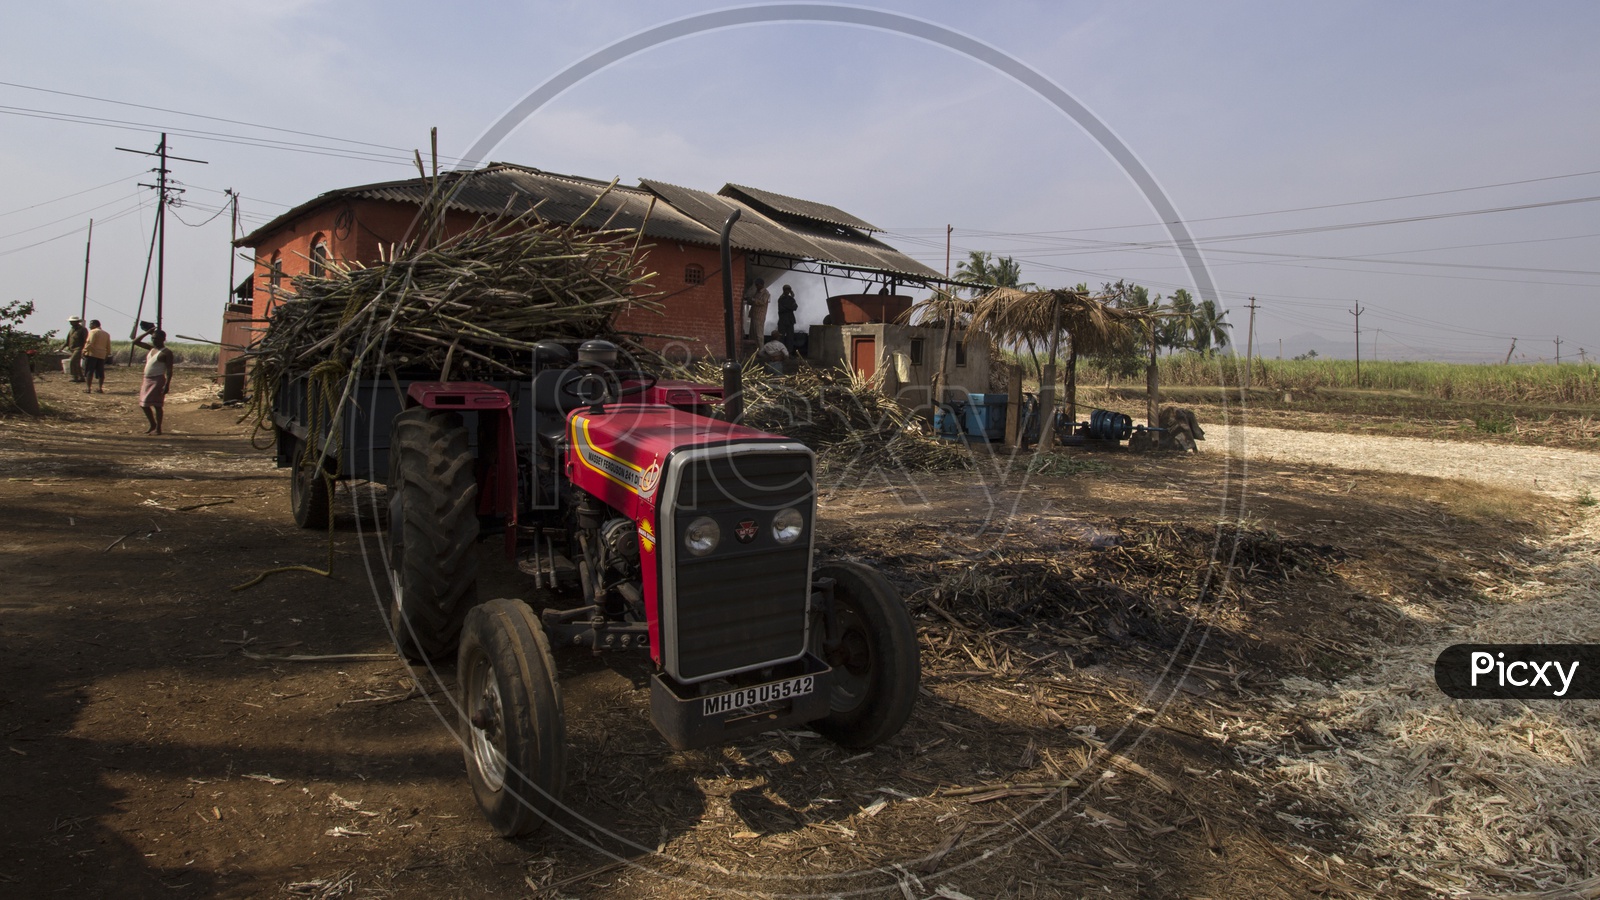 Tractor carrying Sugarcane